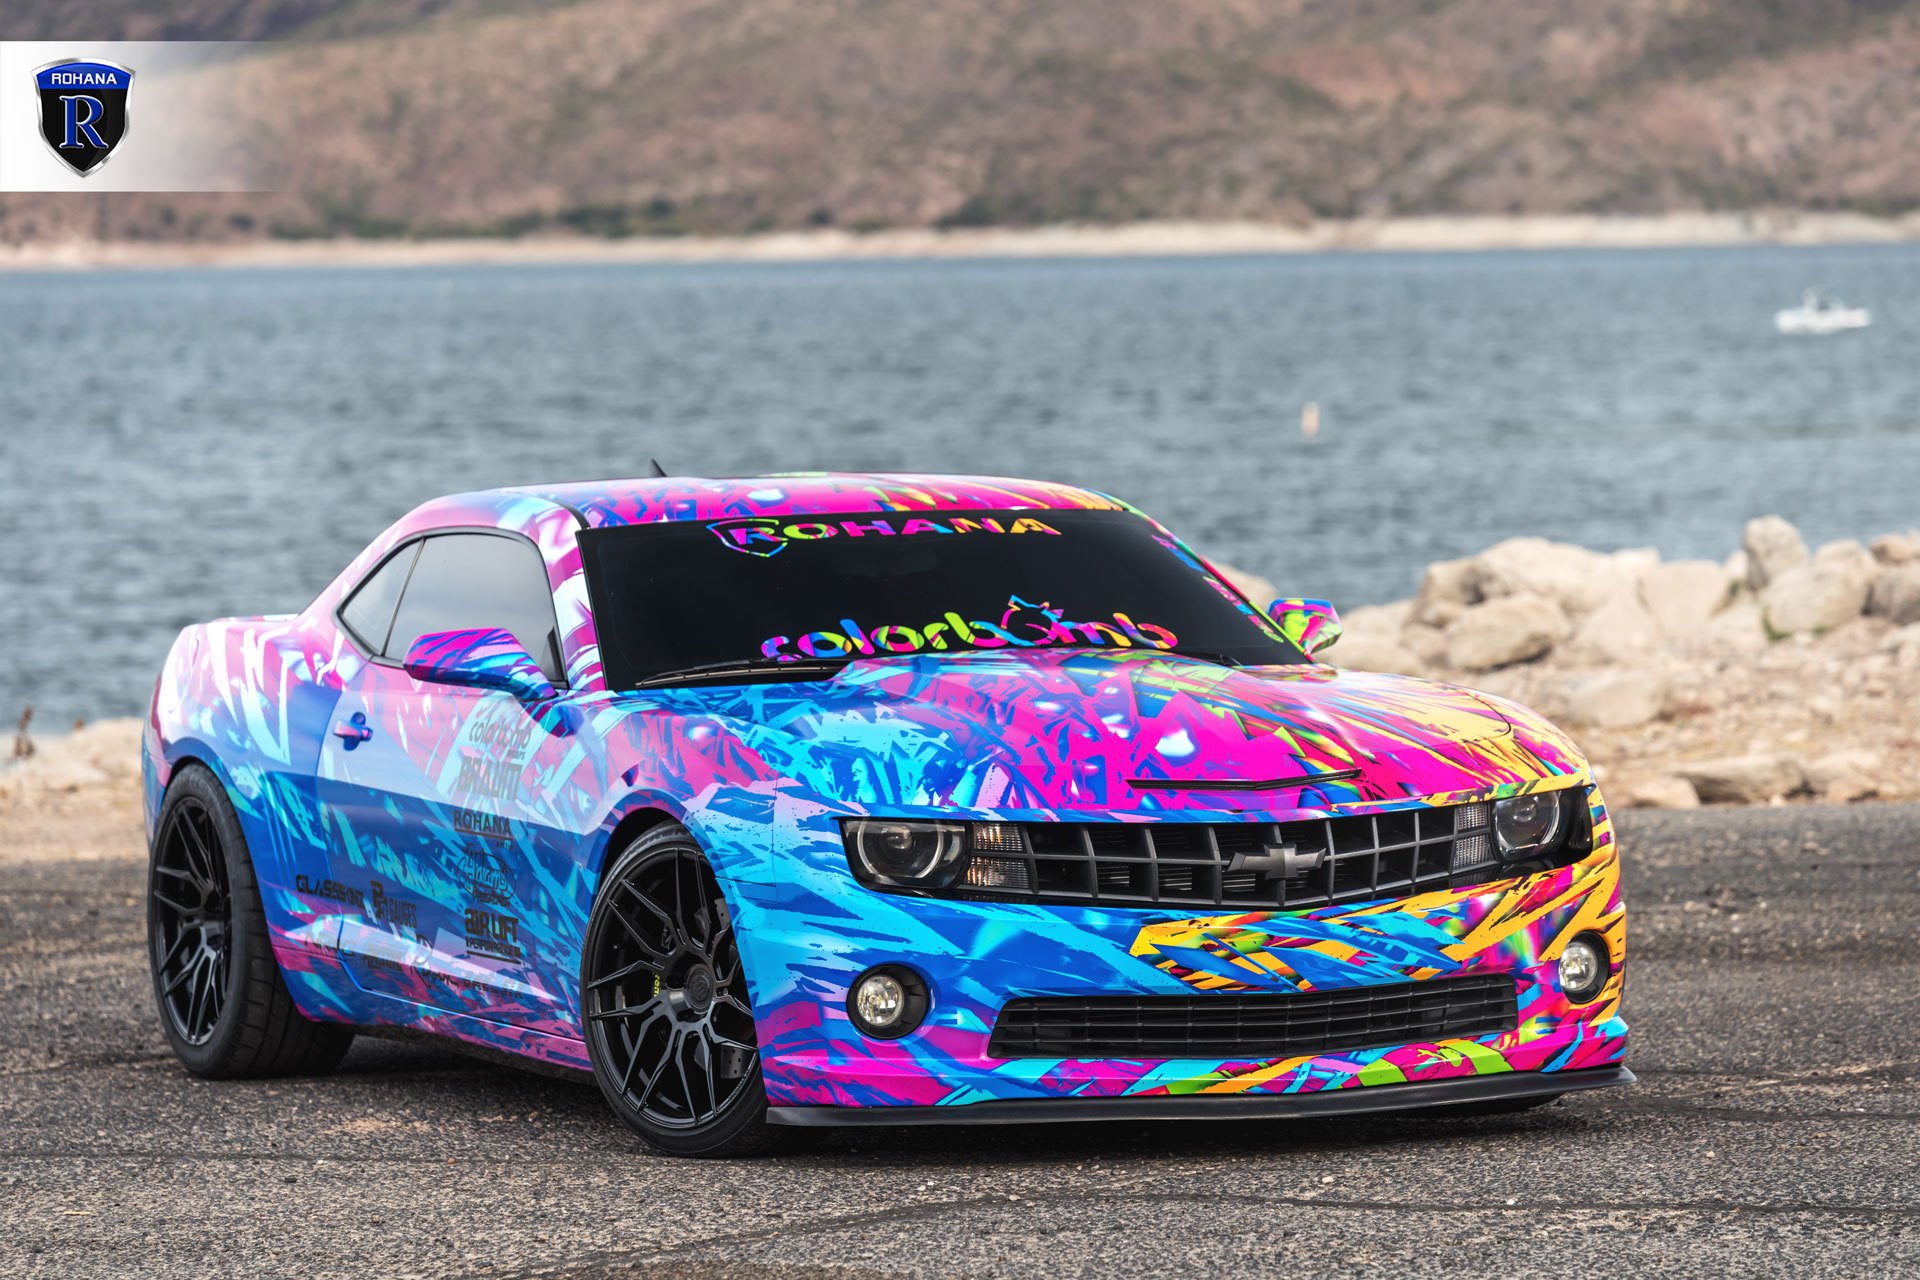 Front Bumper with Fog Lights on Colorful Chevy Camaro - Photo by Rohana Wheels